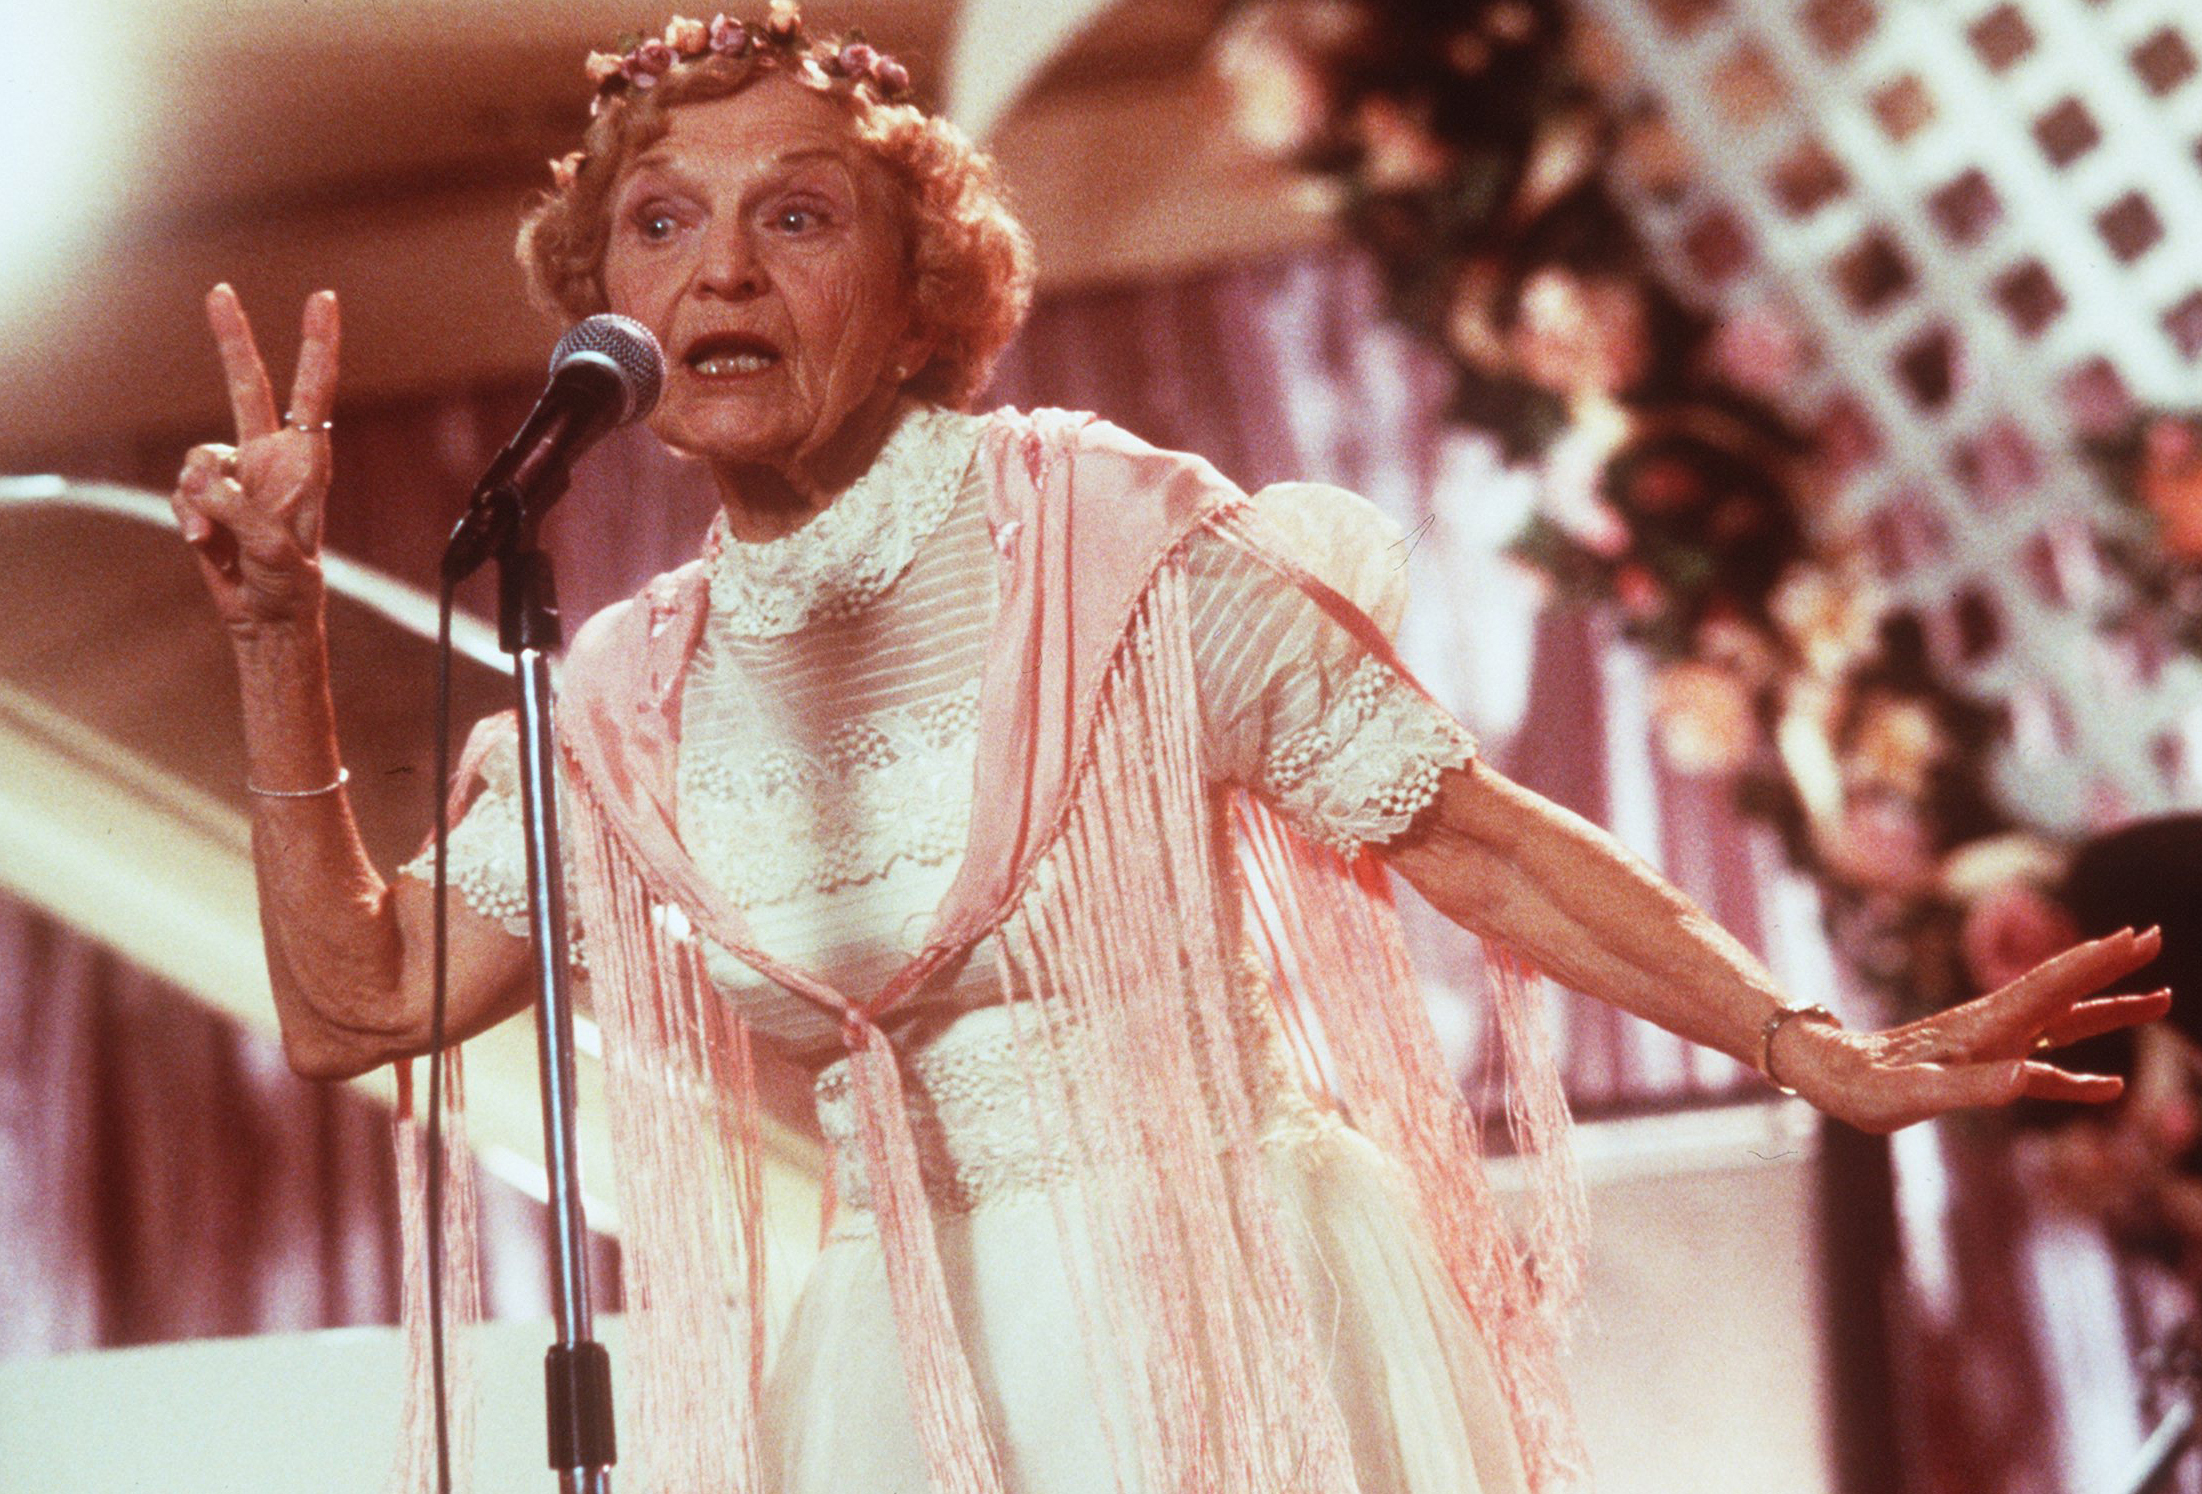 Ellen Albertini Dow stars as Rosie in New Line Cinema's comedy, "The Wedding Singer." (Getty Images)